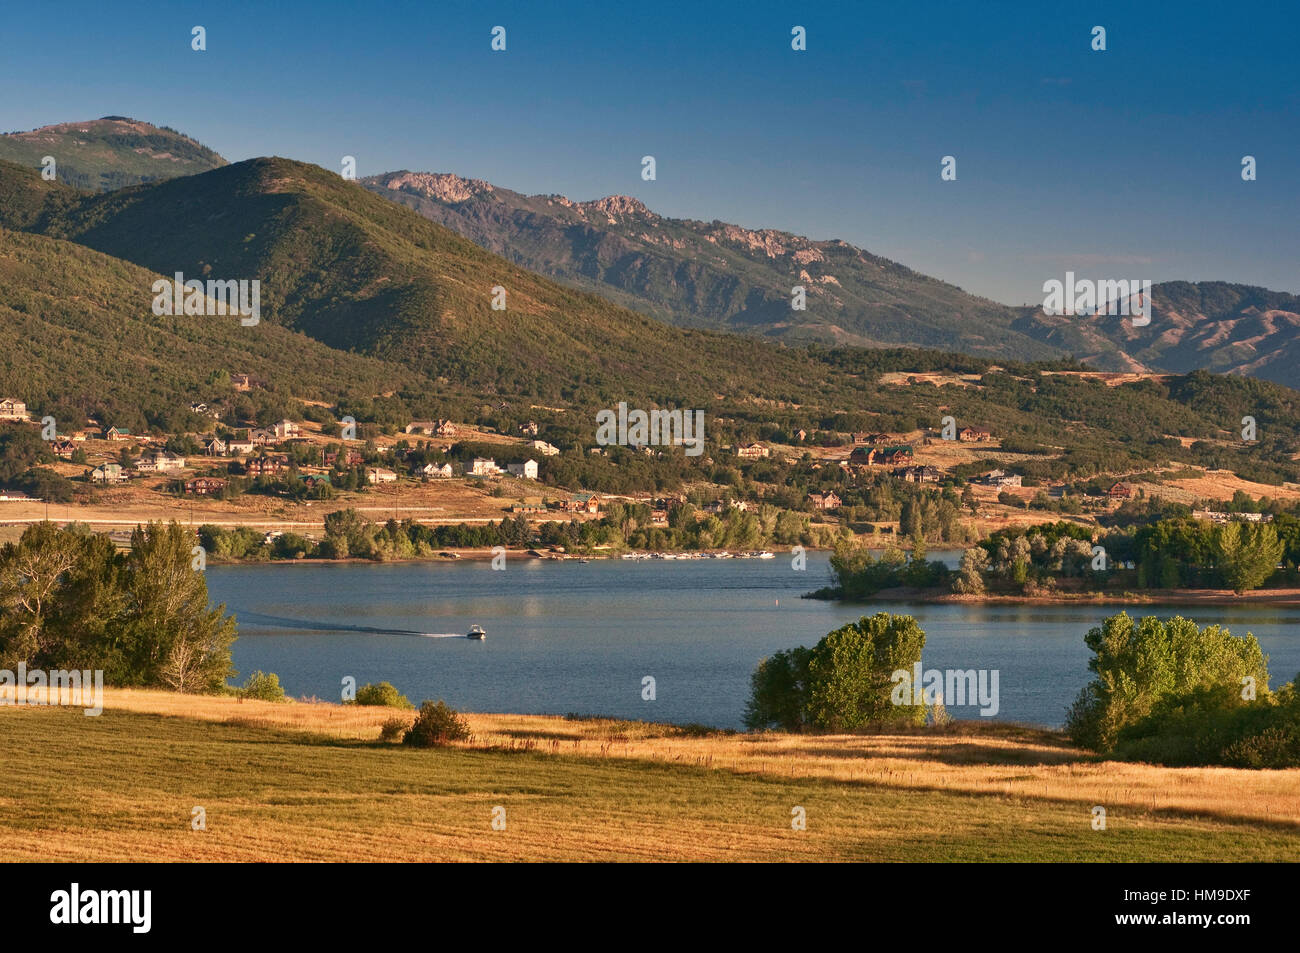 Pineview Reservoir, artificial lake in Ogden Valley, Wasatch Mountains, Utah, USA Stock Photo